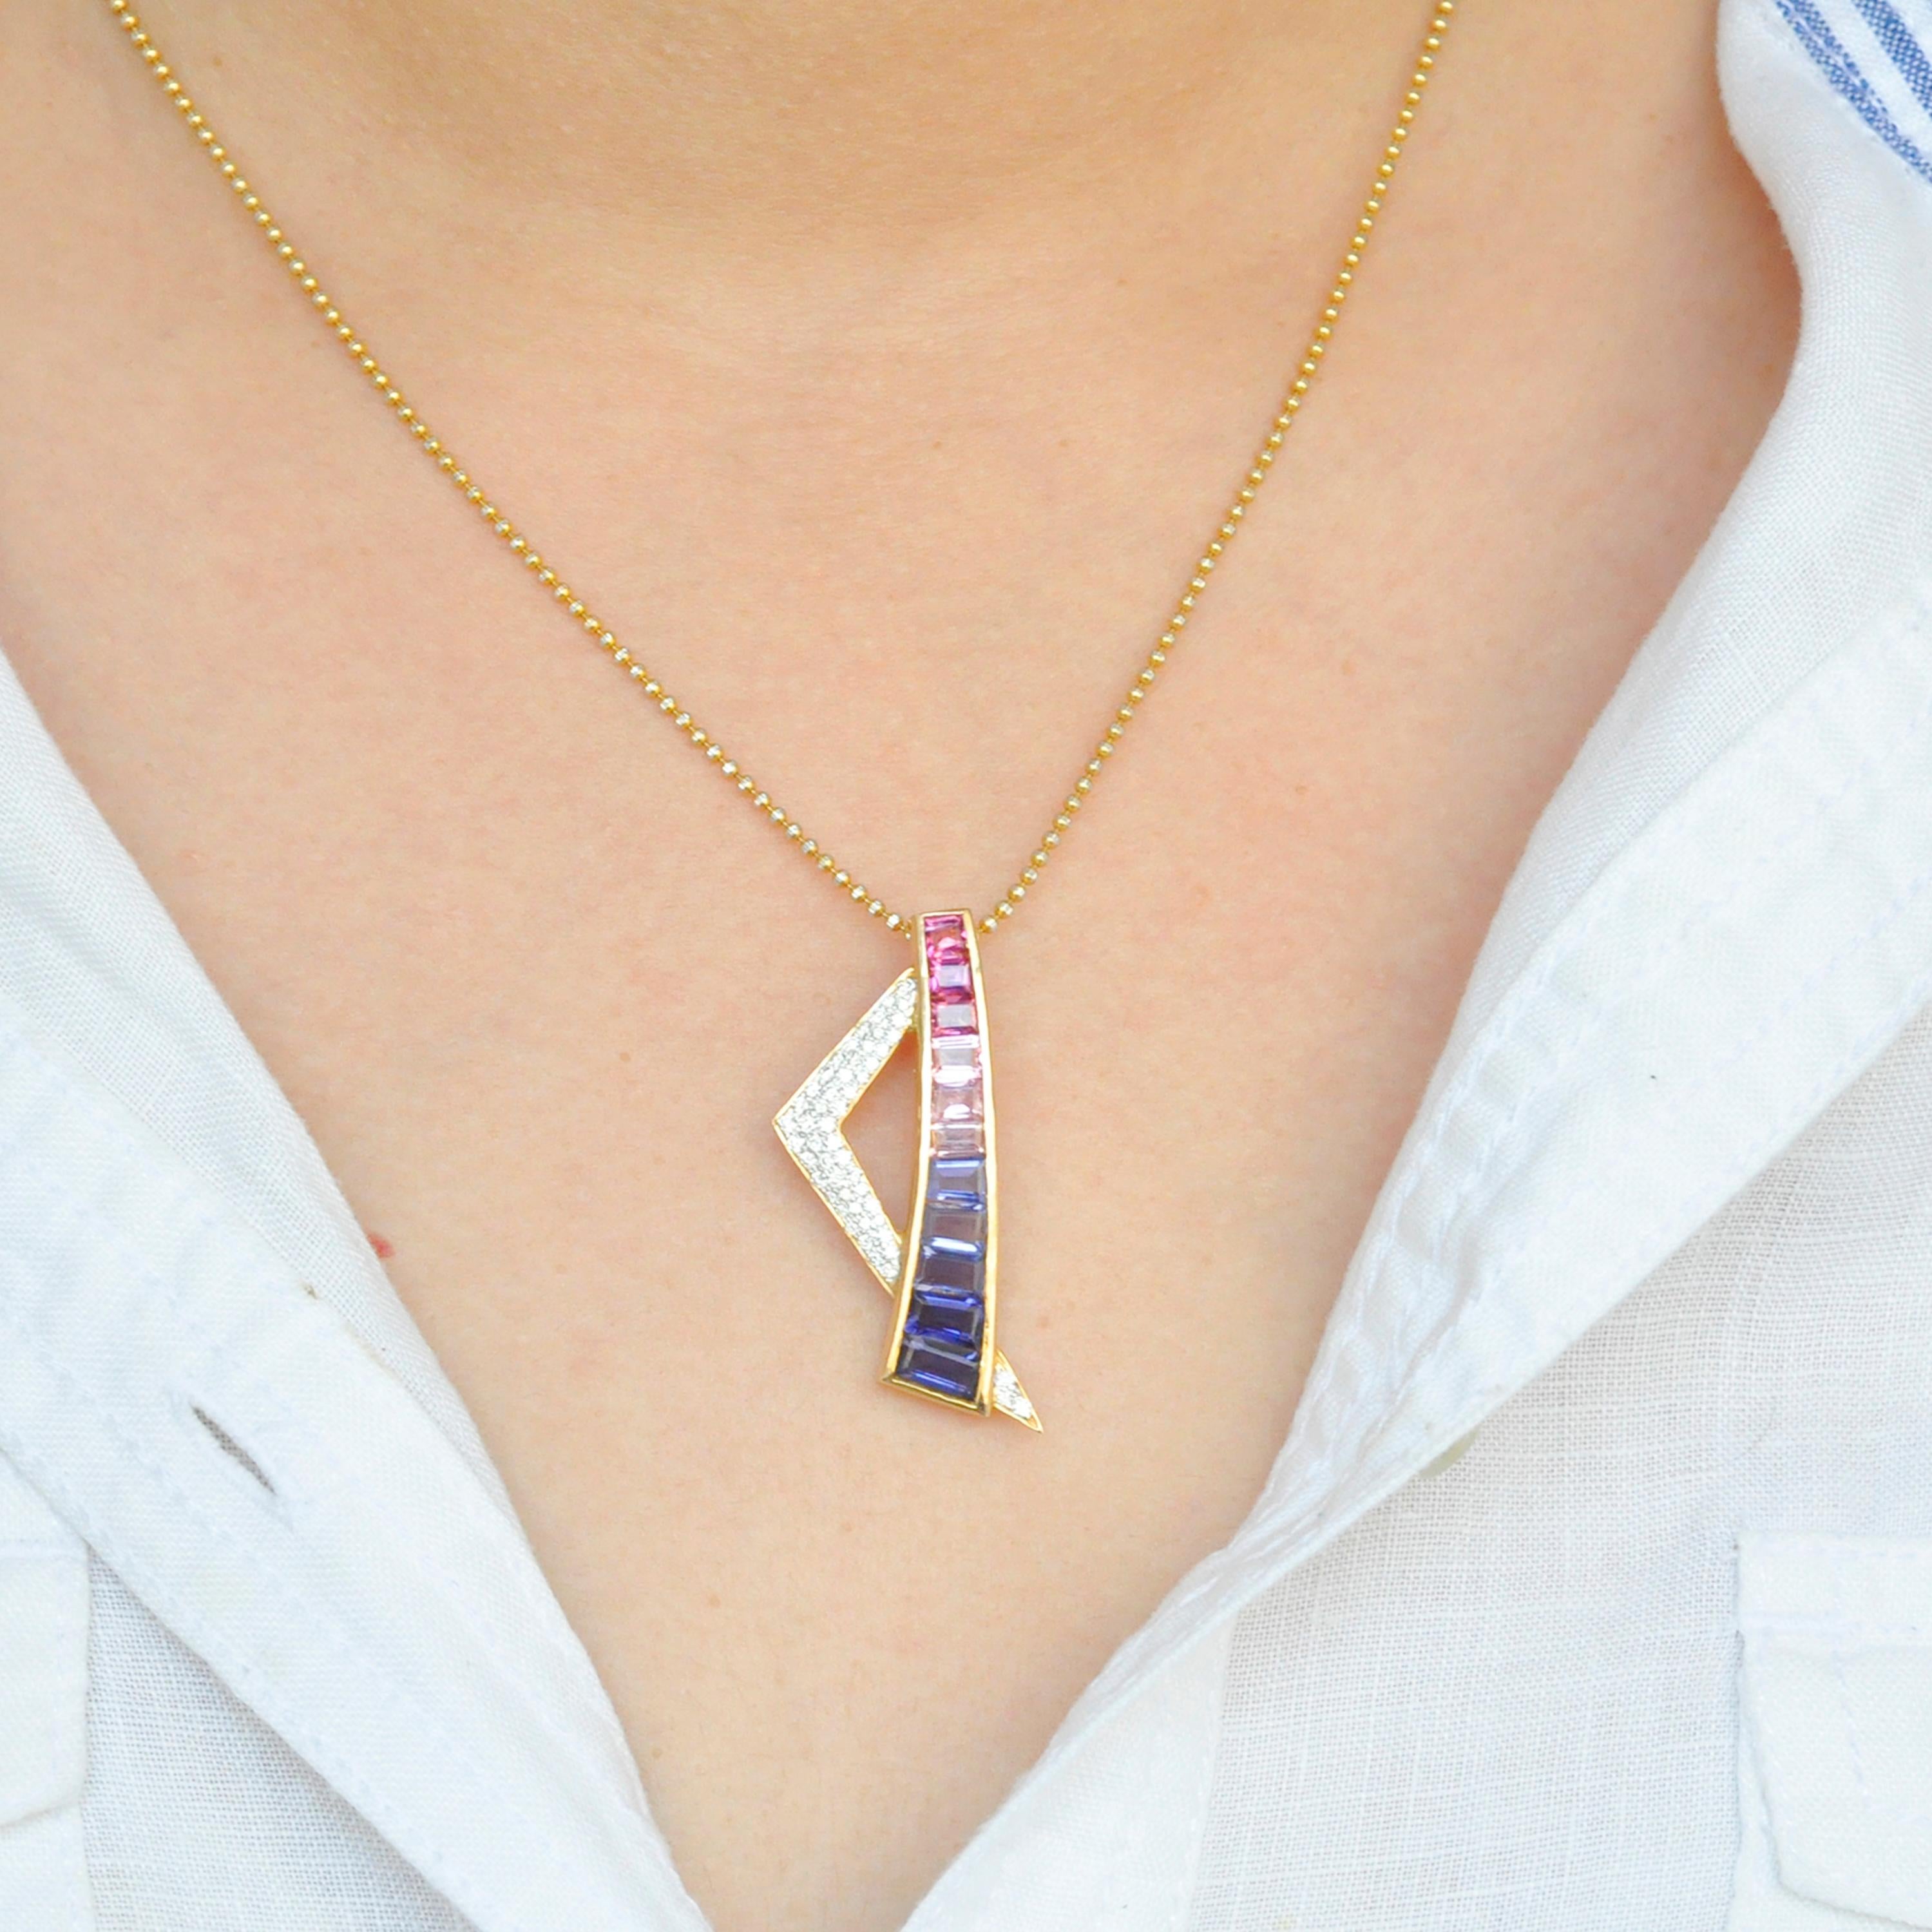 18 karat yellow gold pink tourmaline iolite diamond contemporary pendant. 

This contemporary and edgy pendant is exquisite. The hot pink, baby pink tourmaline and iolites are hand selected in gradation, taper cut and channel set in 18 karat yellow